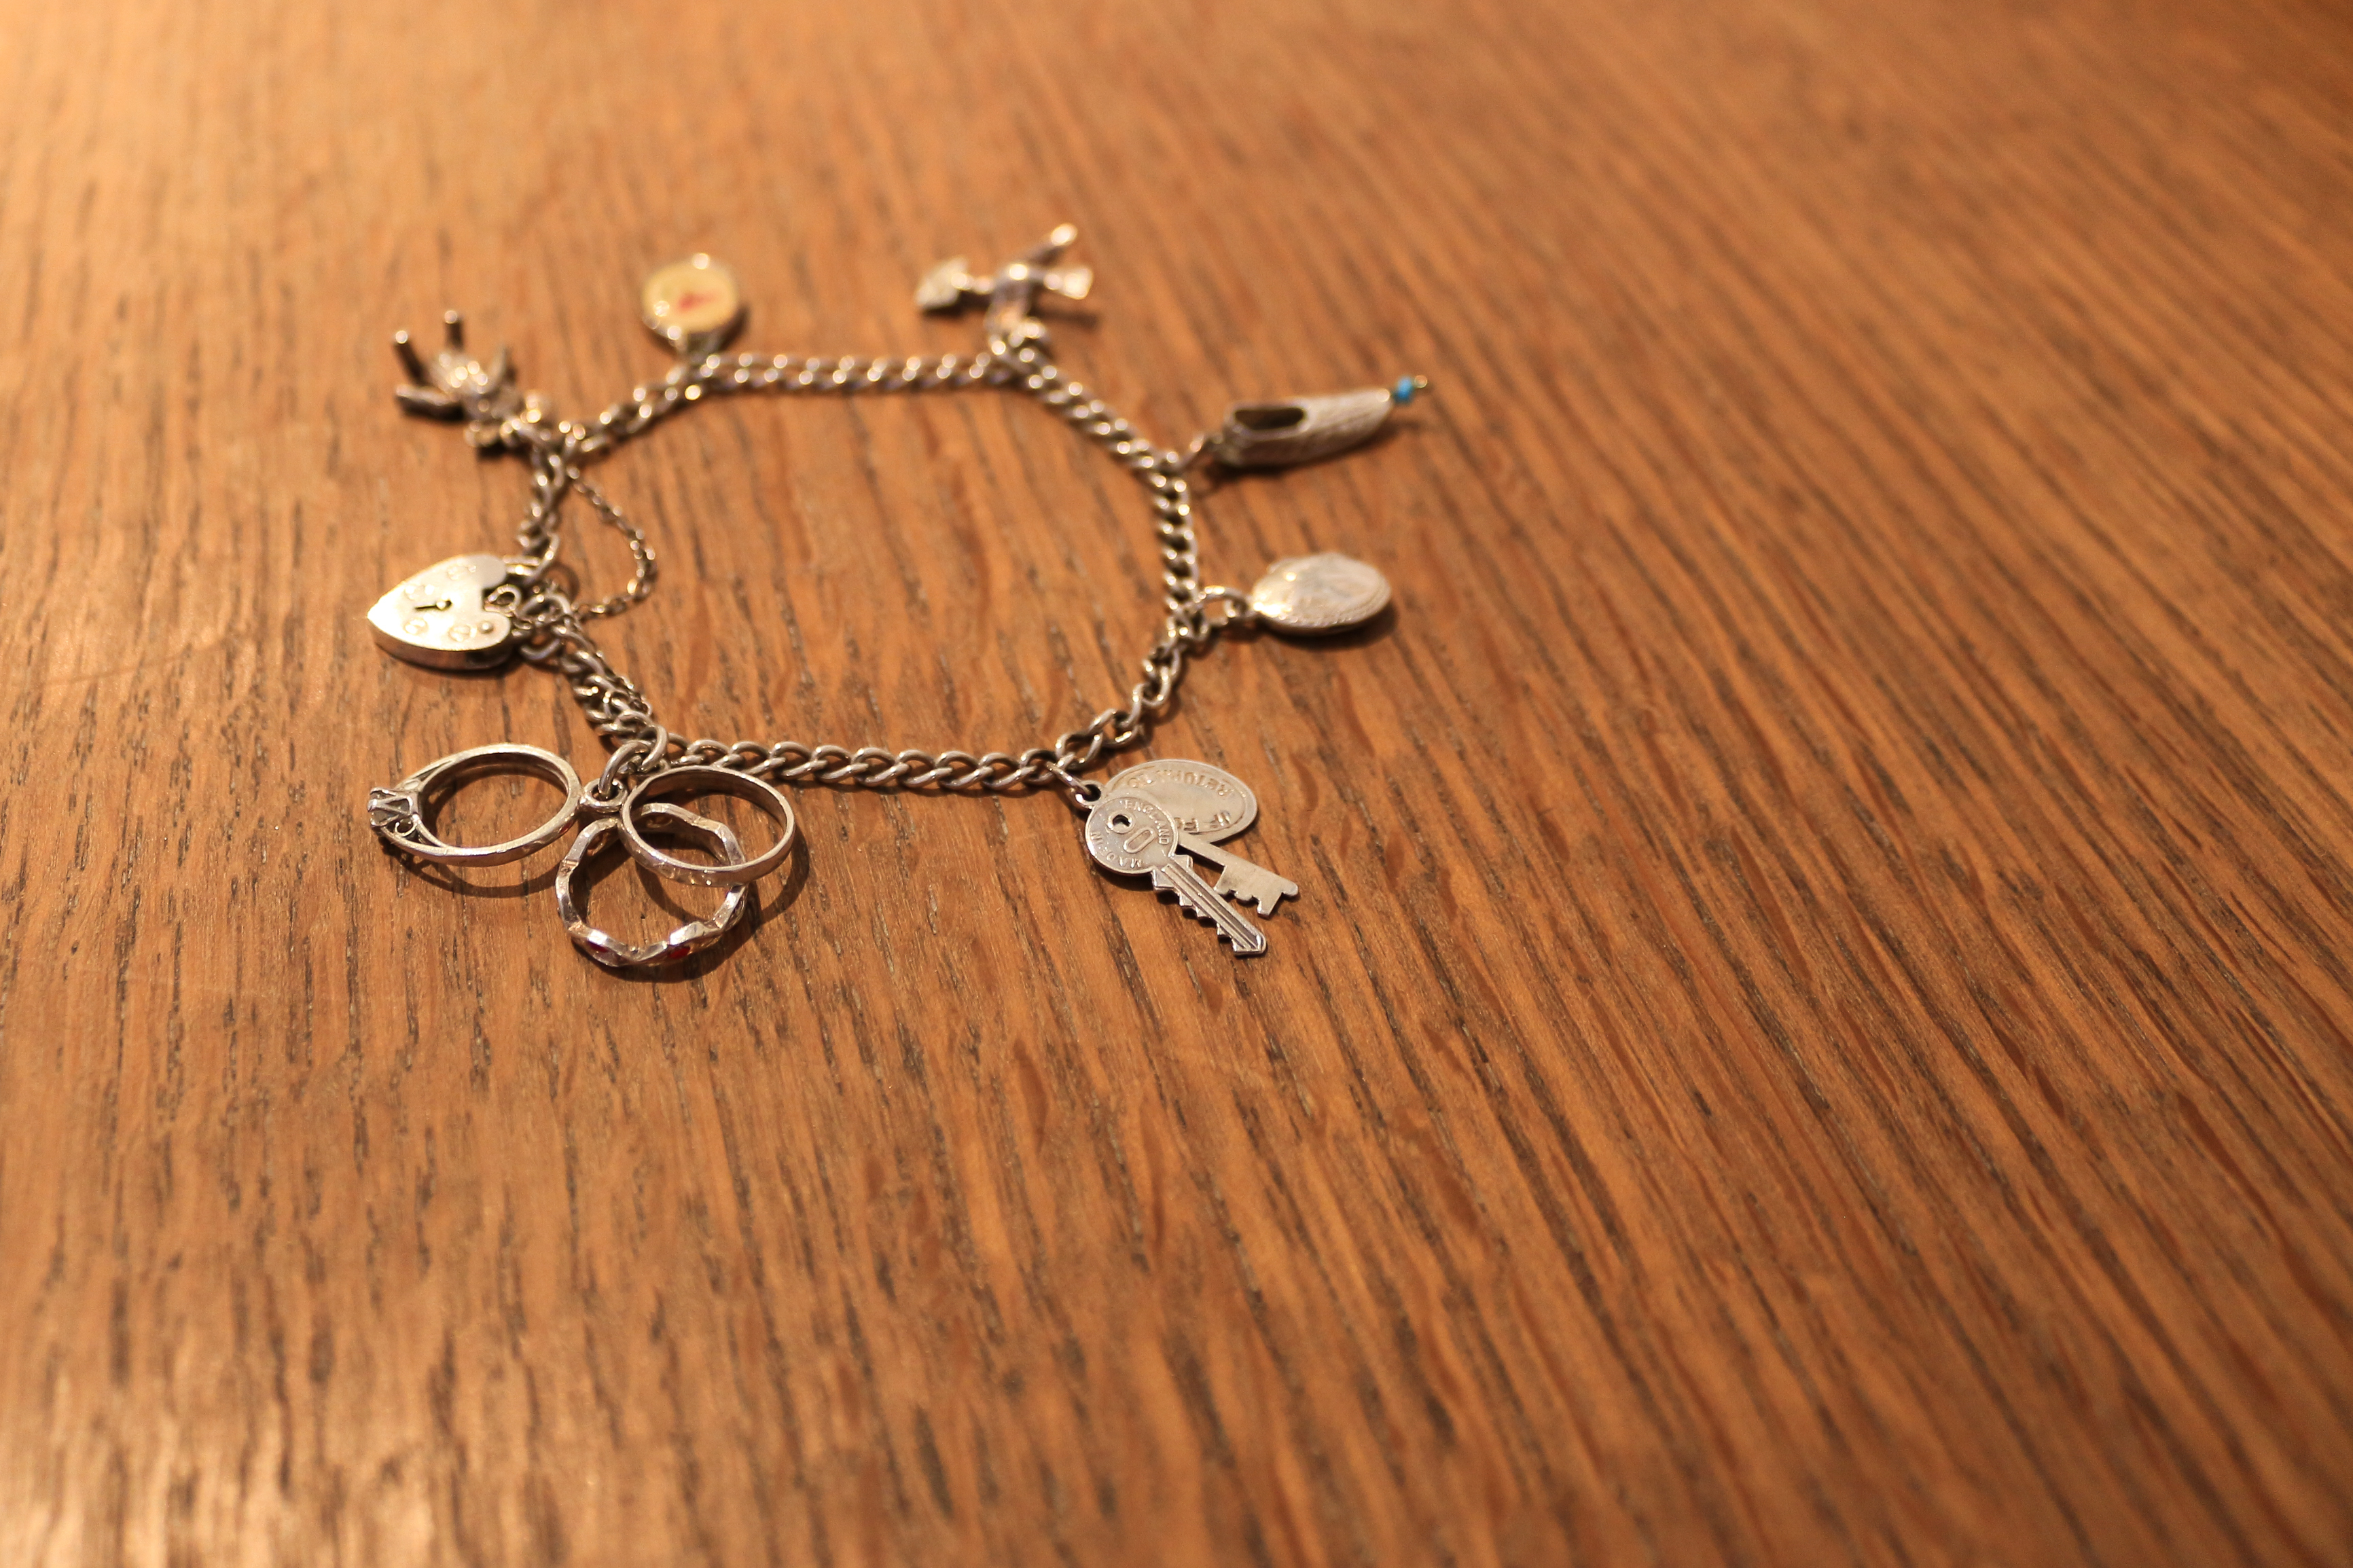 A charm bracelet lies on a wooden table